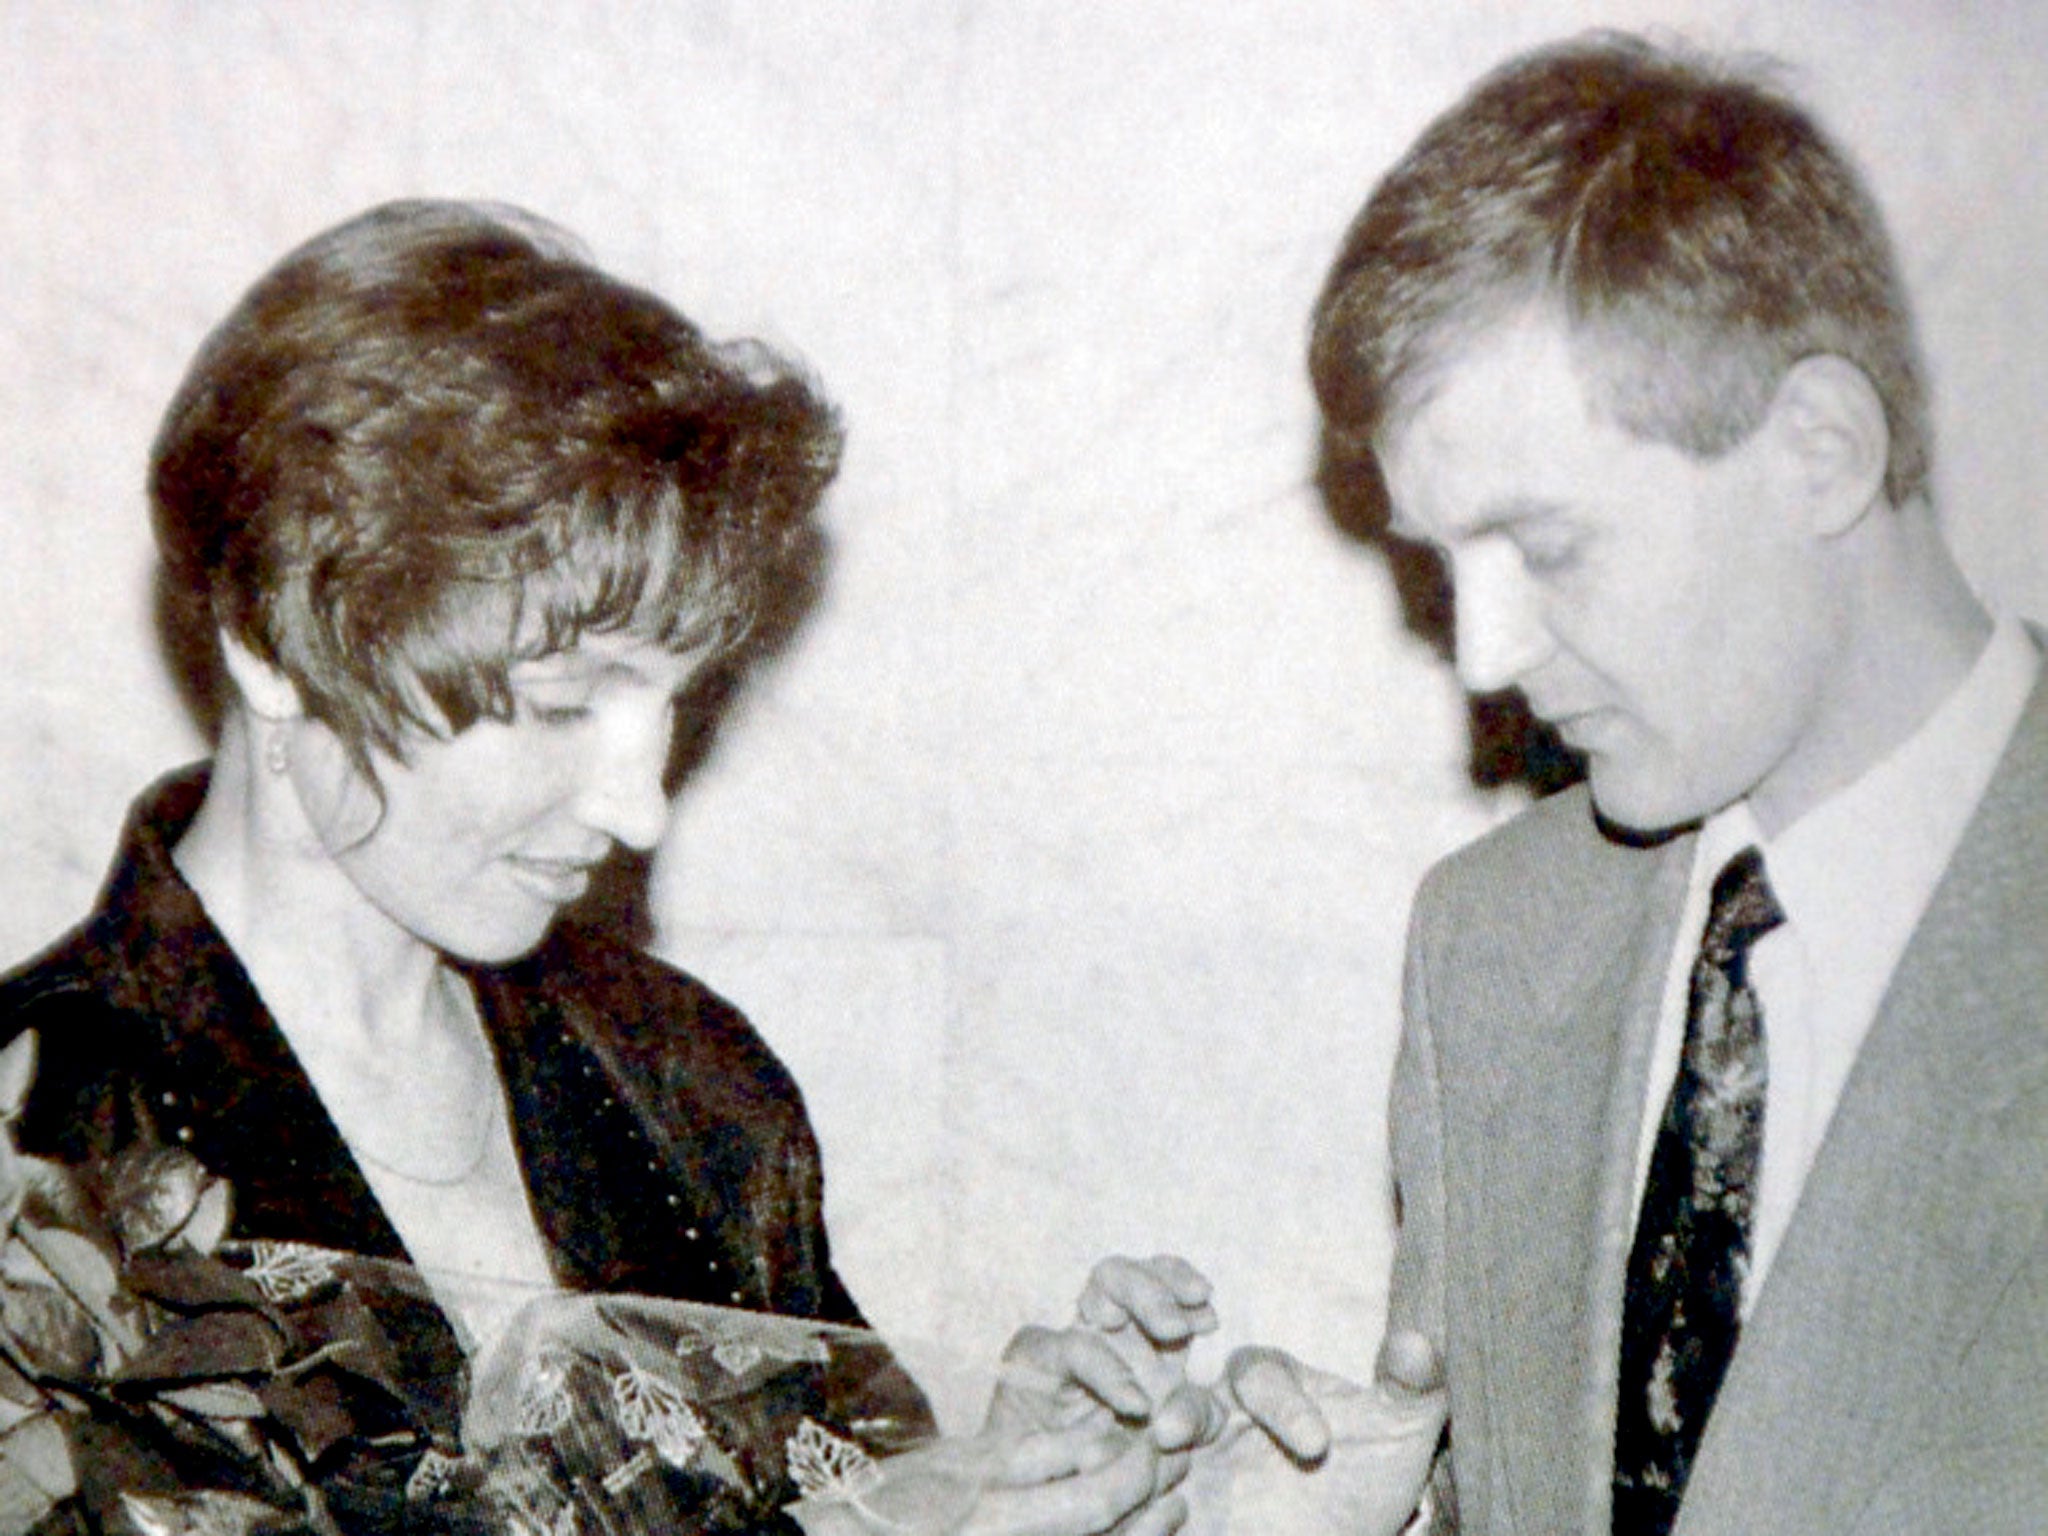 Litvinenko with his wife Marina on their wedding day in 1994 - both said it was love at first sight (Getty)